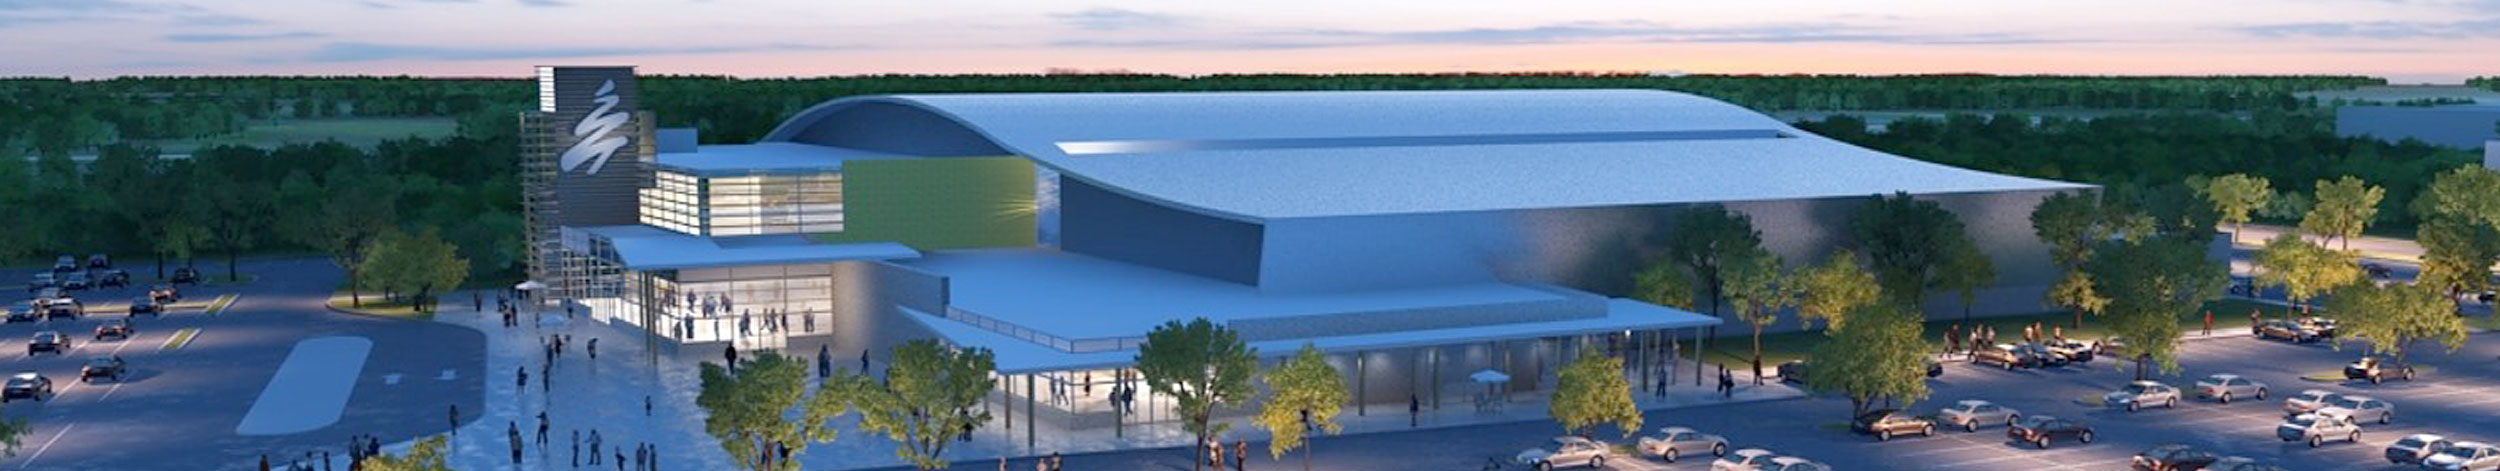 Proposed Multi-Use Sport and Event Centre